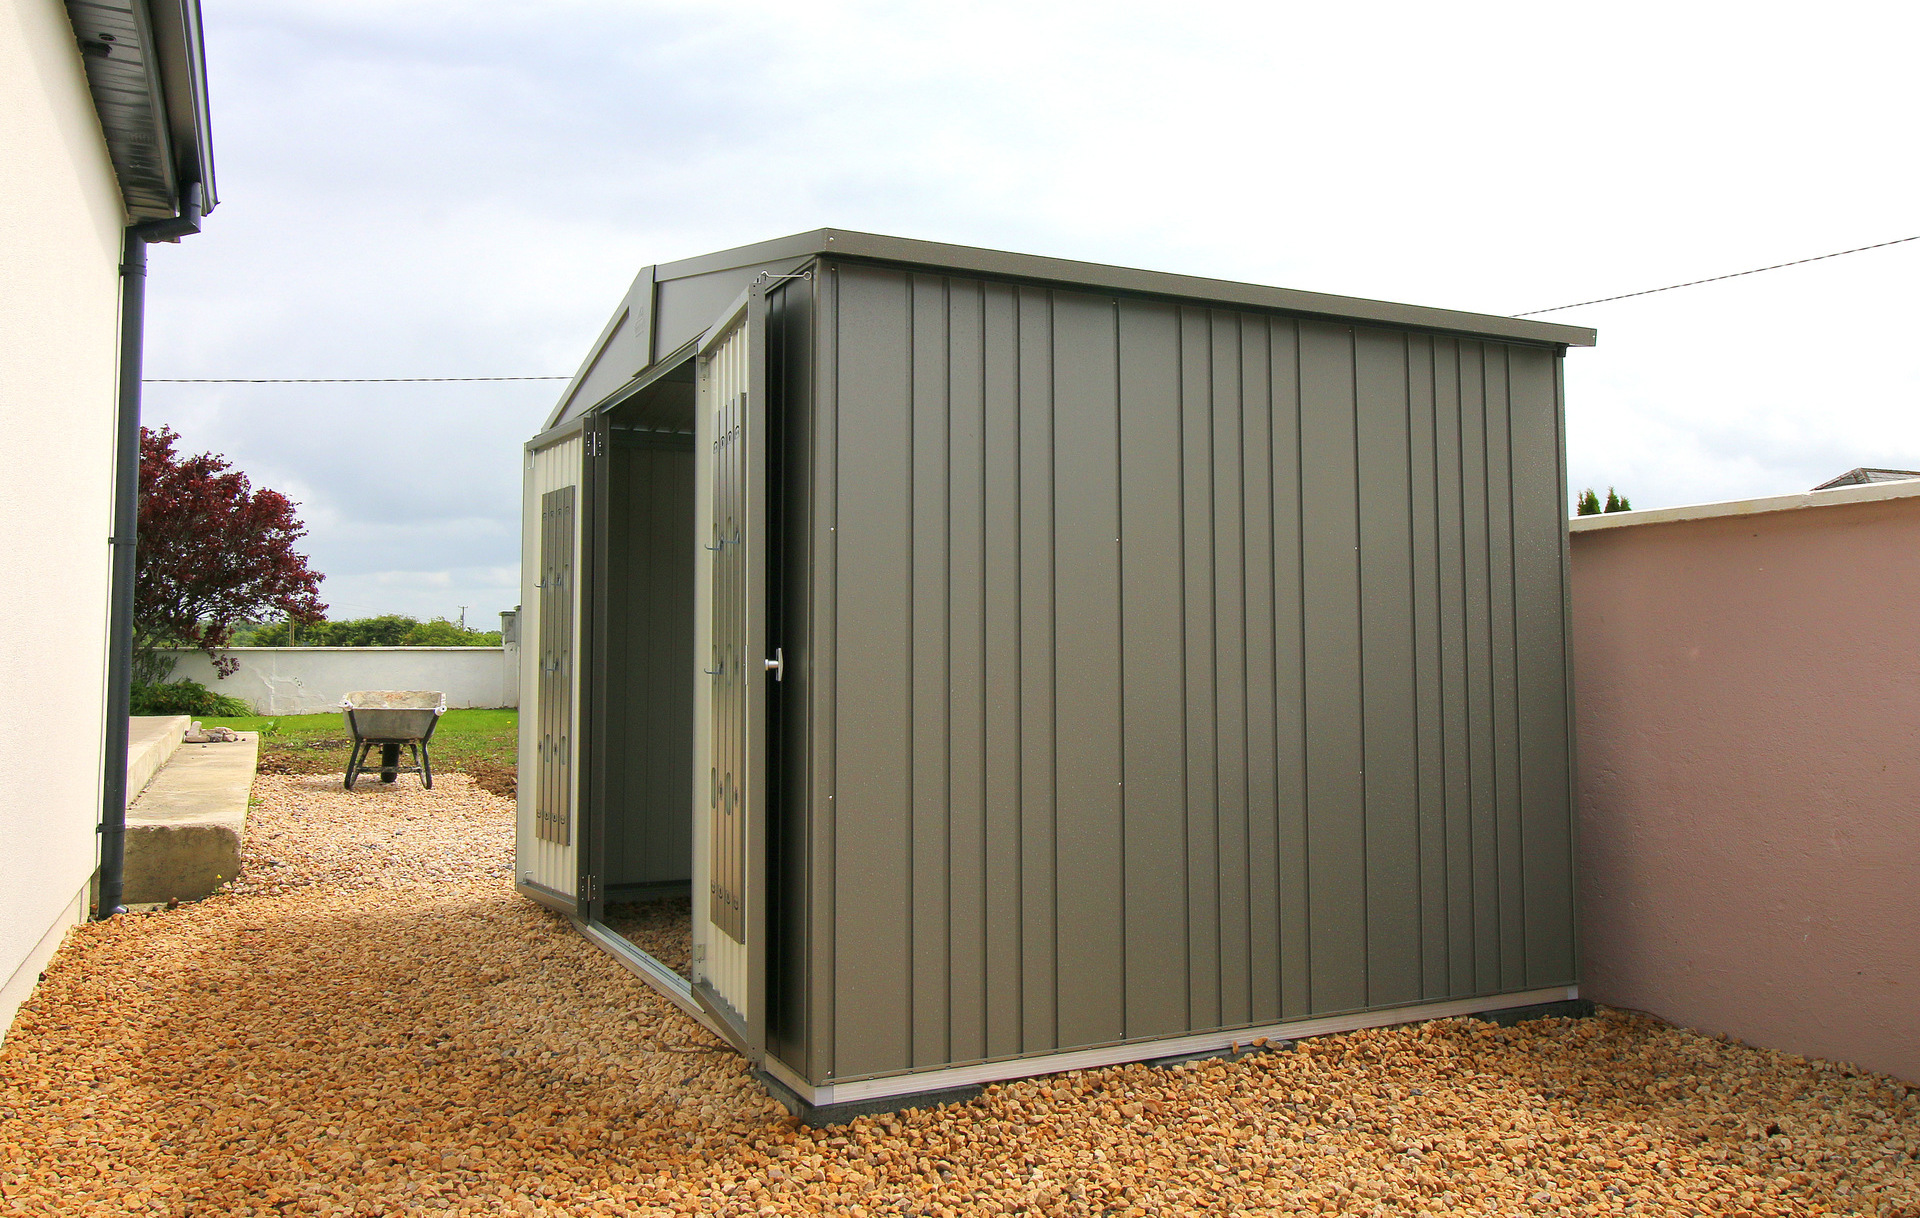 Biohort Europa Garden Shed, Size 5 in metallic quartz grey - supplied + fitted in Athlone, Co Westmeath  by Owen Chubb Landscapers